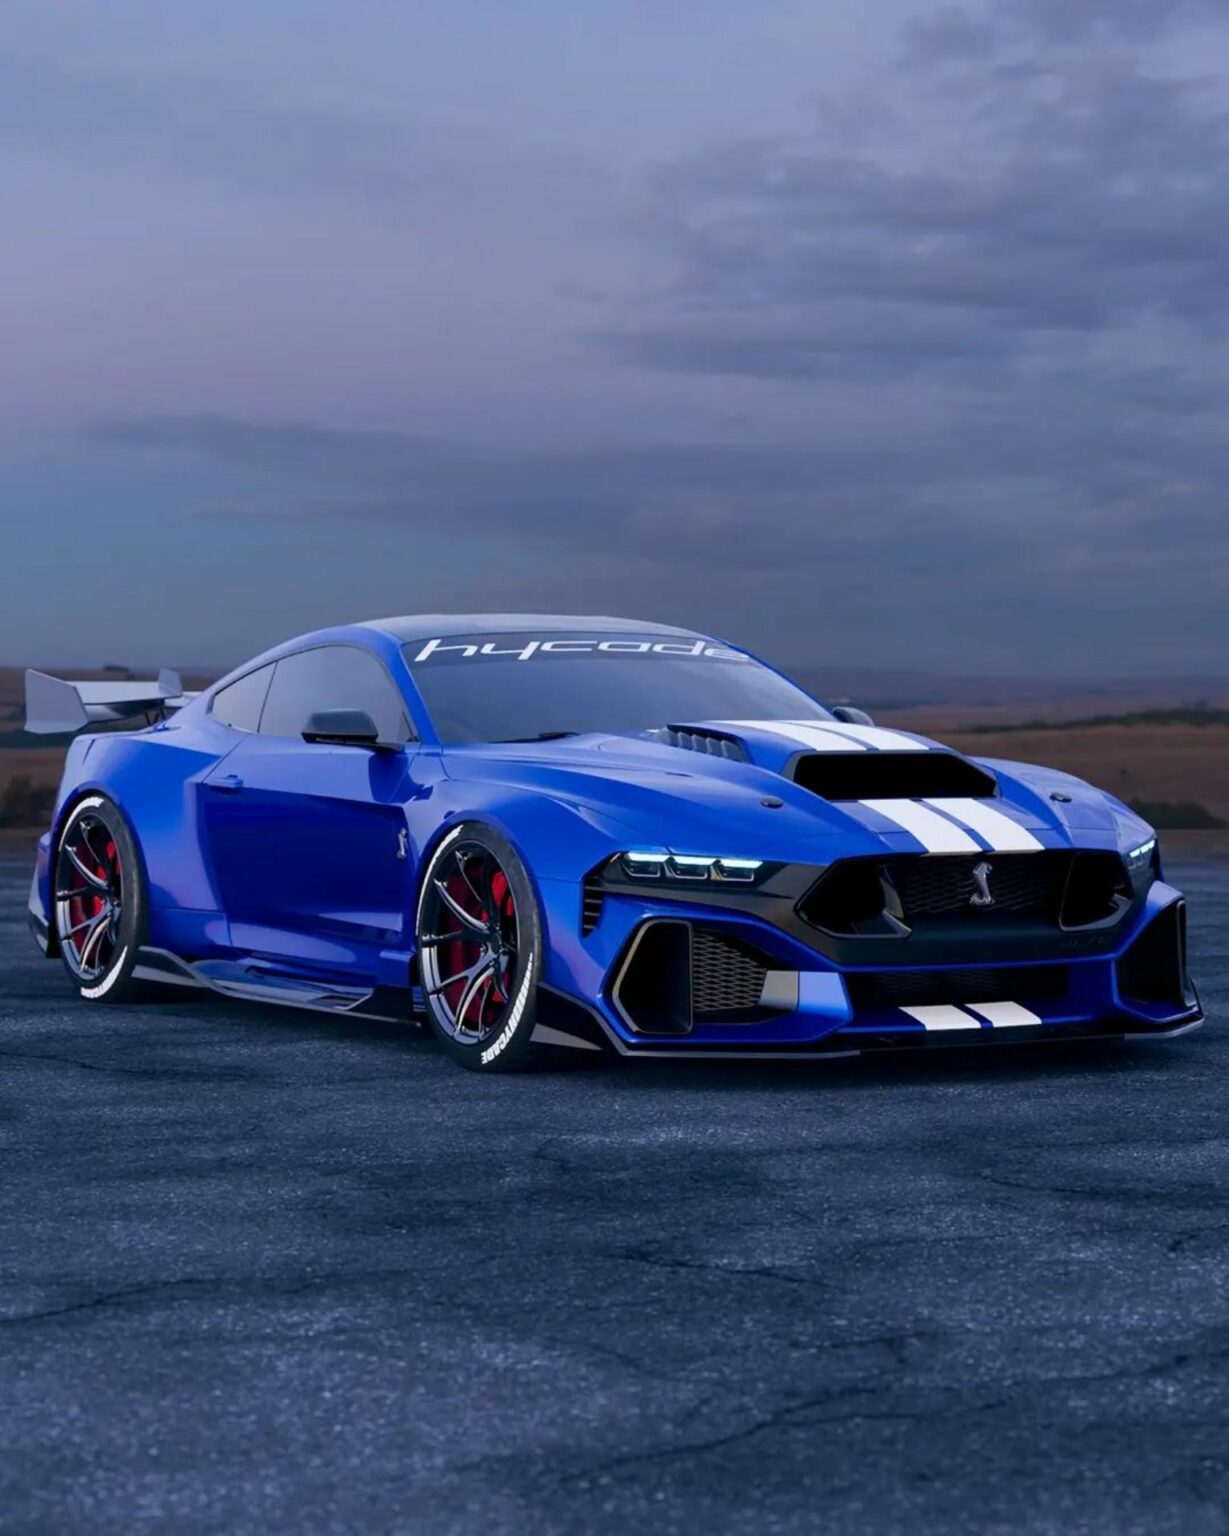 What If The Next 2026 Shelby GT500 Looked Like This Render? Carscoops